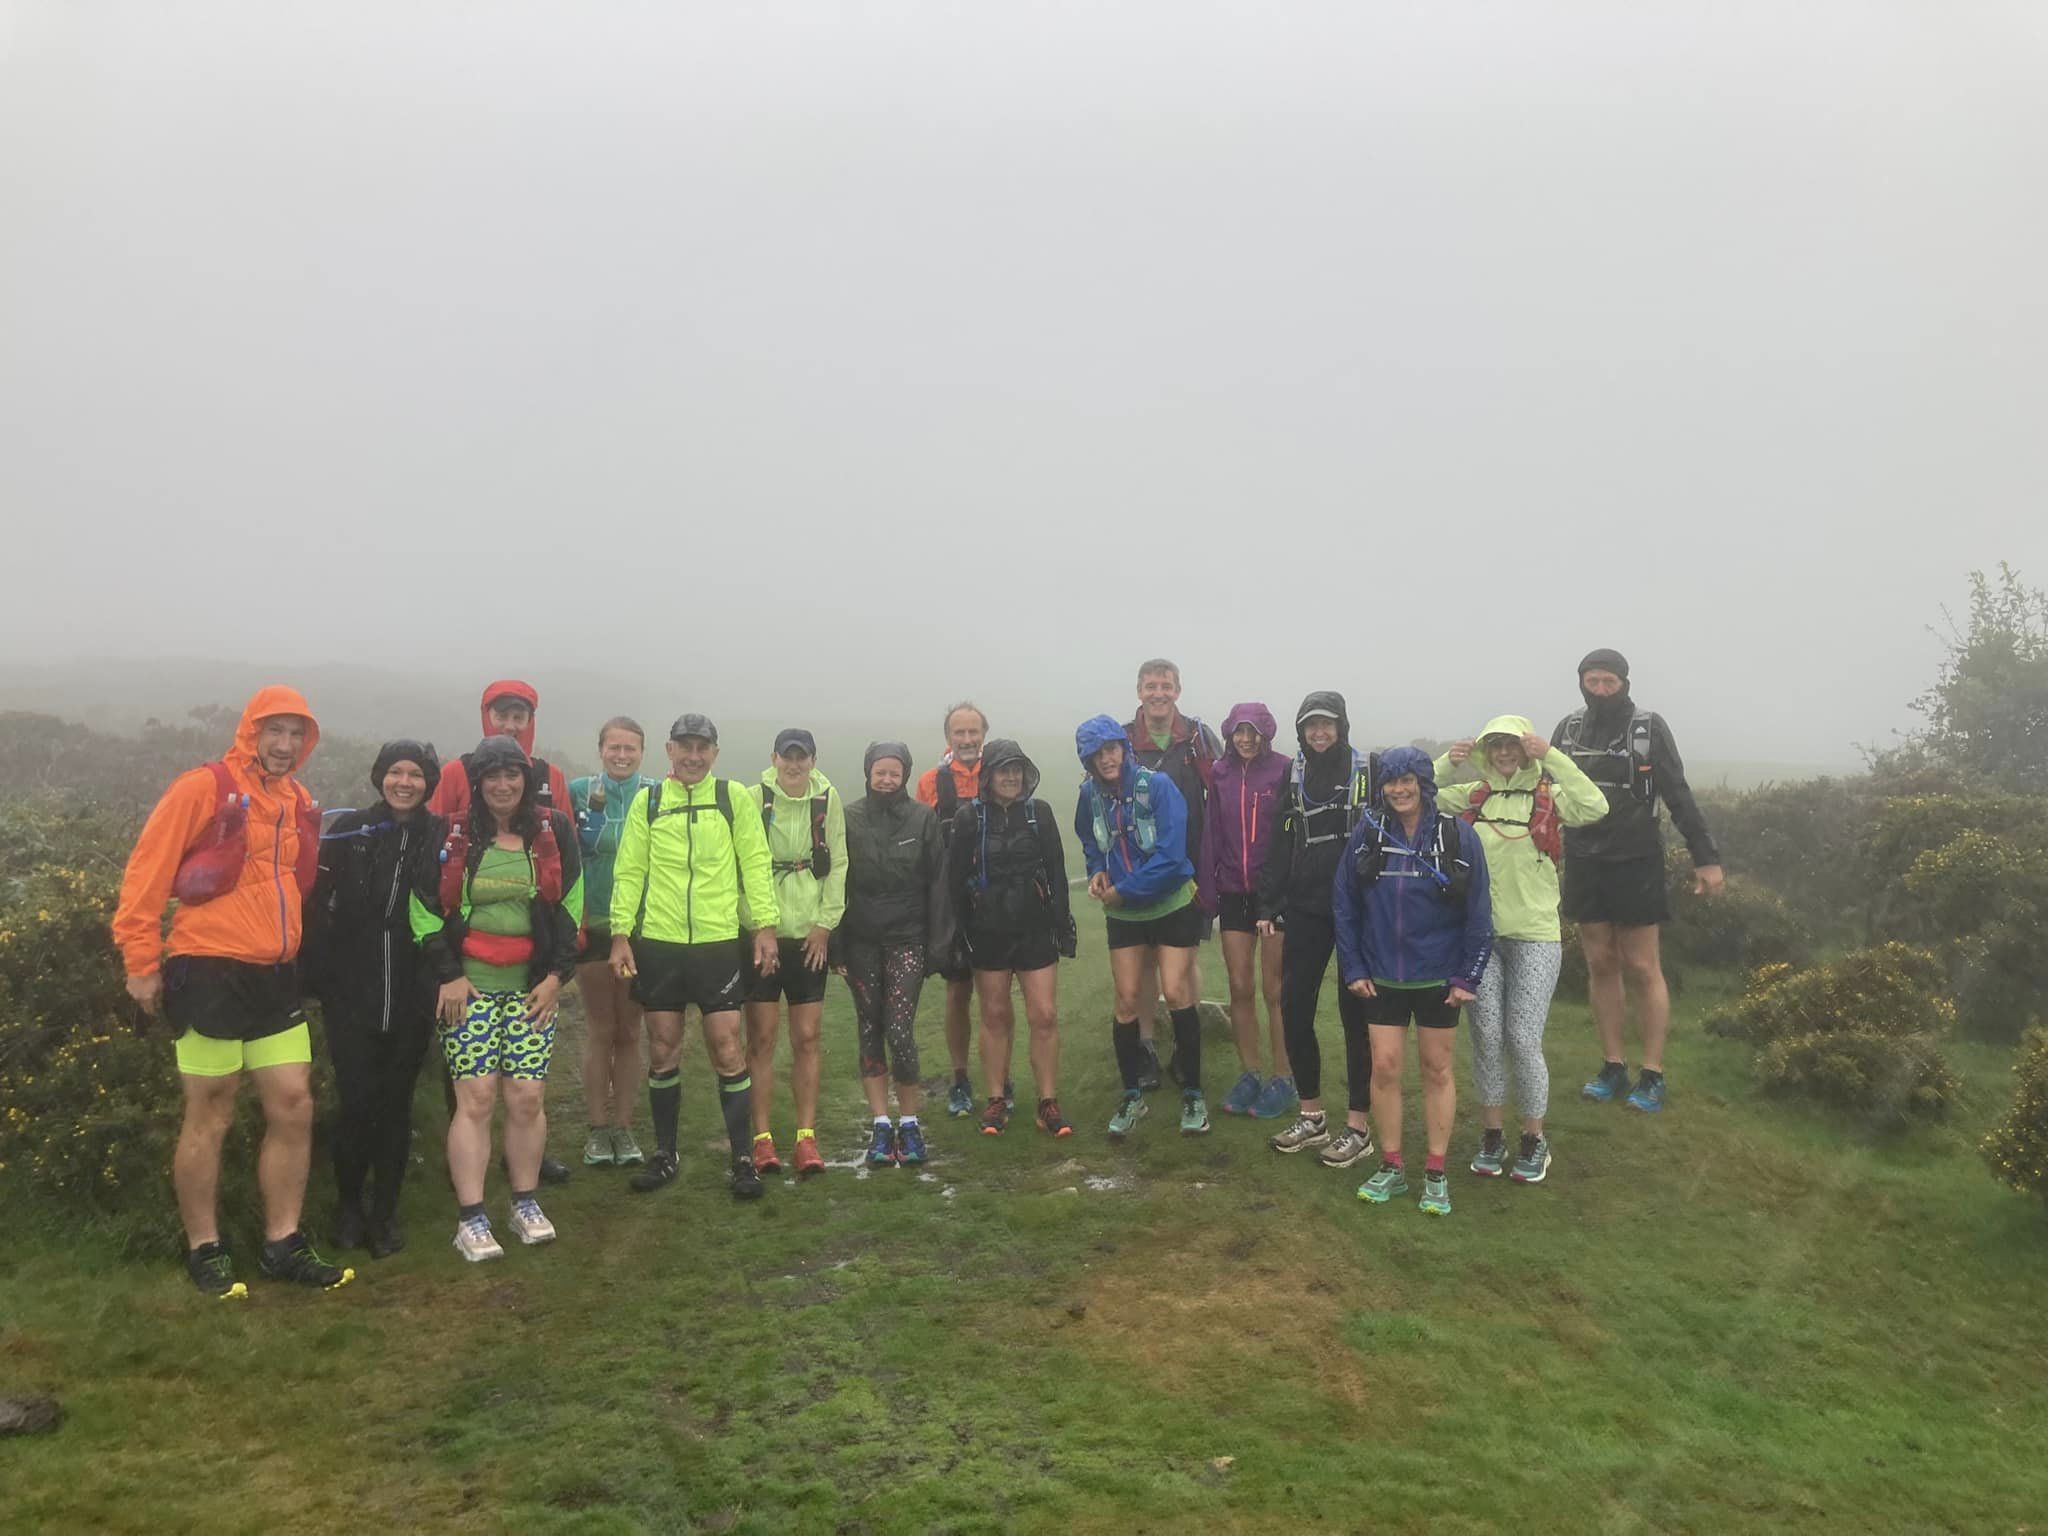 Sidmouth Running Club’s Character Building Club Outing